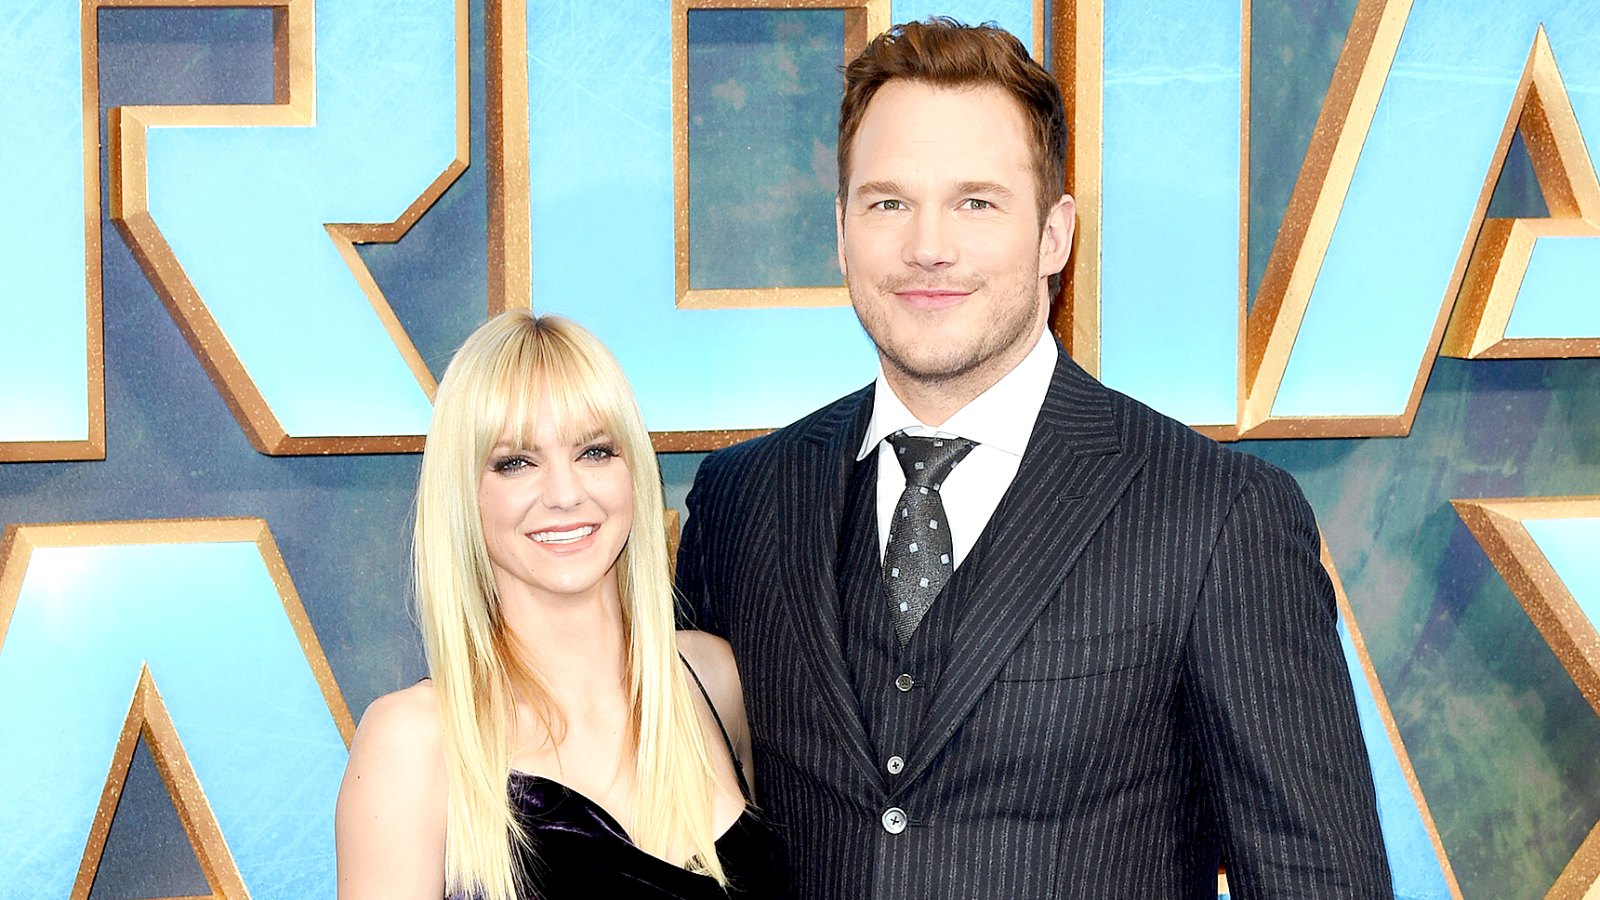 Chris Pratt and Anna Faris attend the UK screening of "Guardians of the Galaxy Vol. 2" at Eventim Apollo on April 24, 2017 in London, United Kingdom.